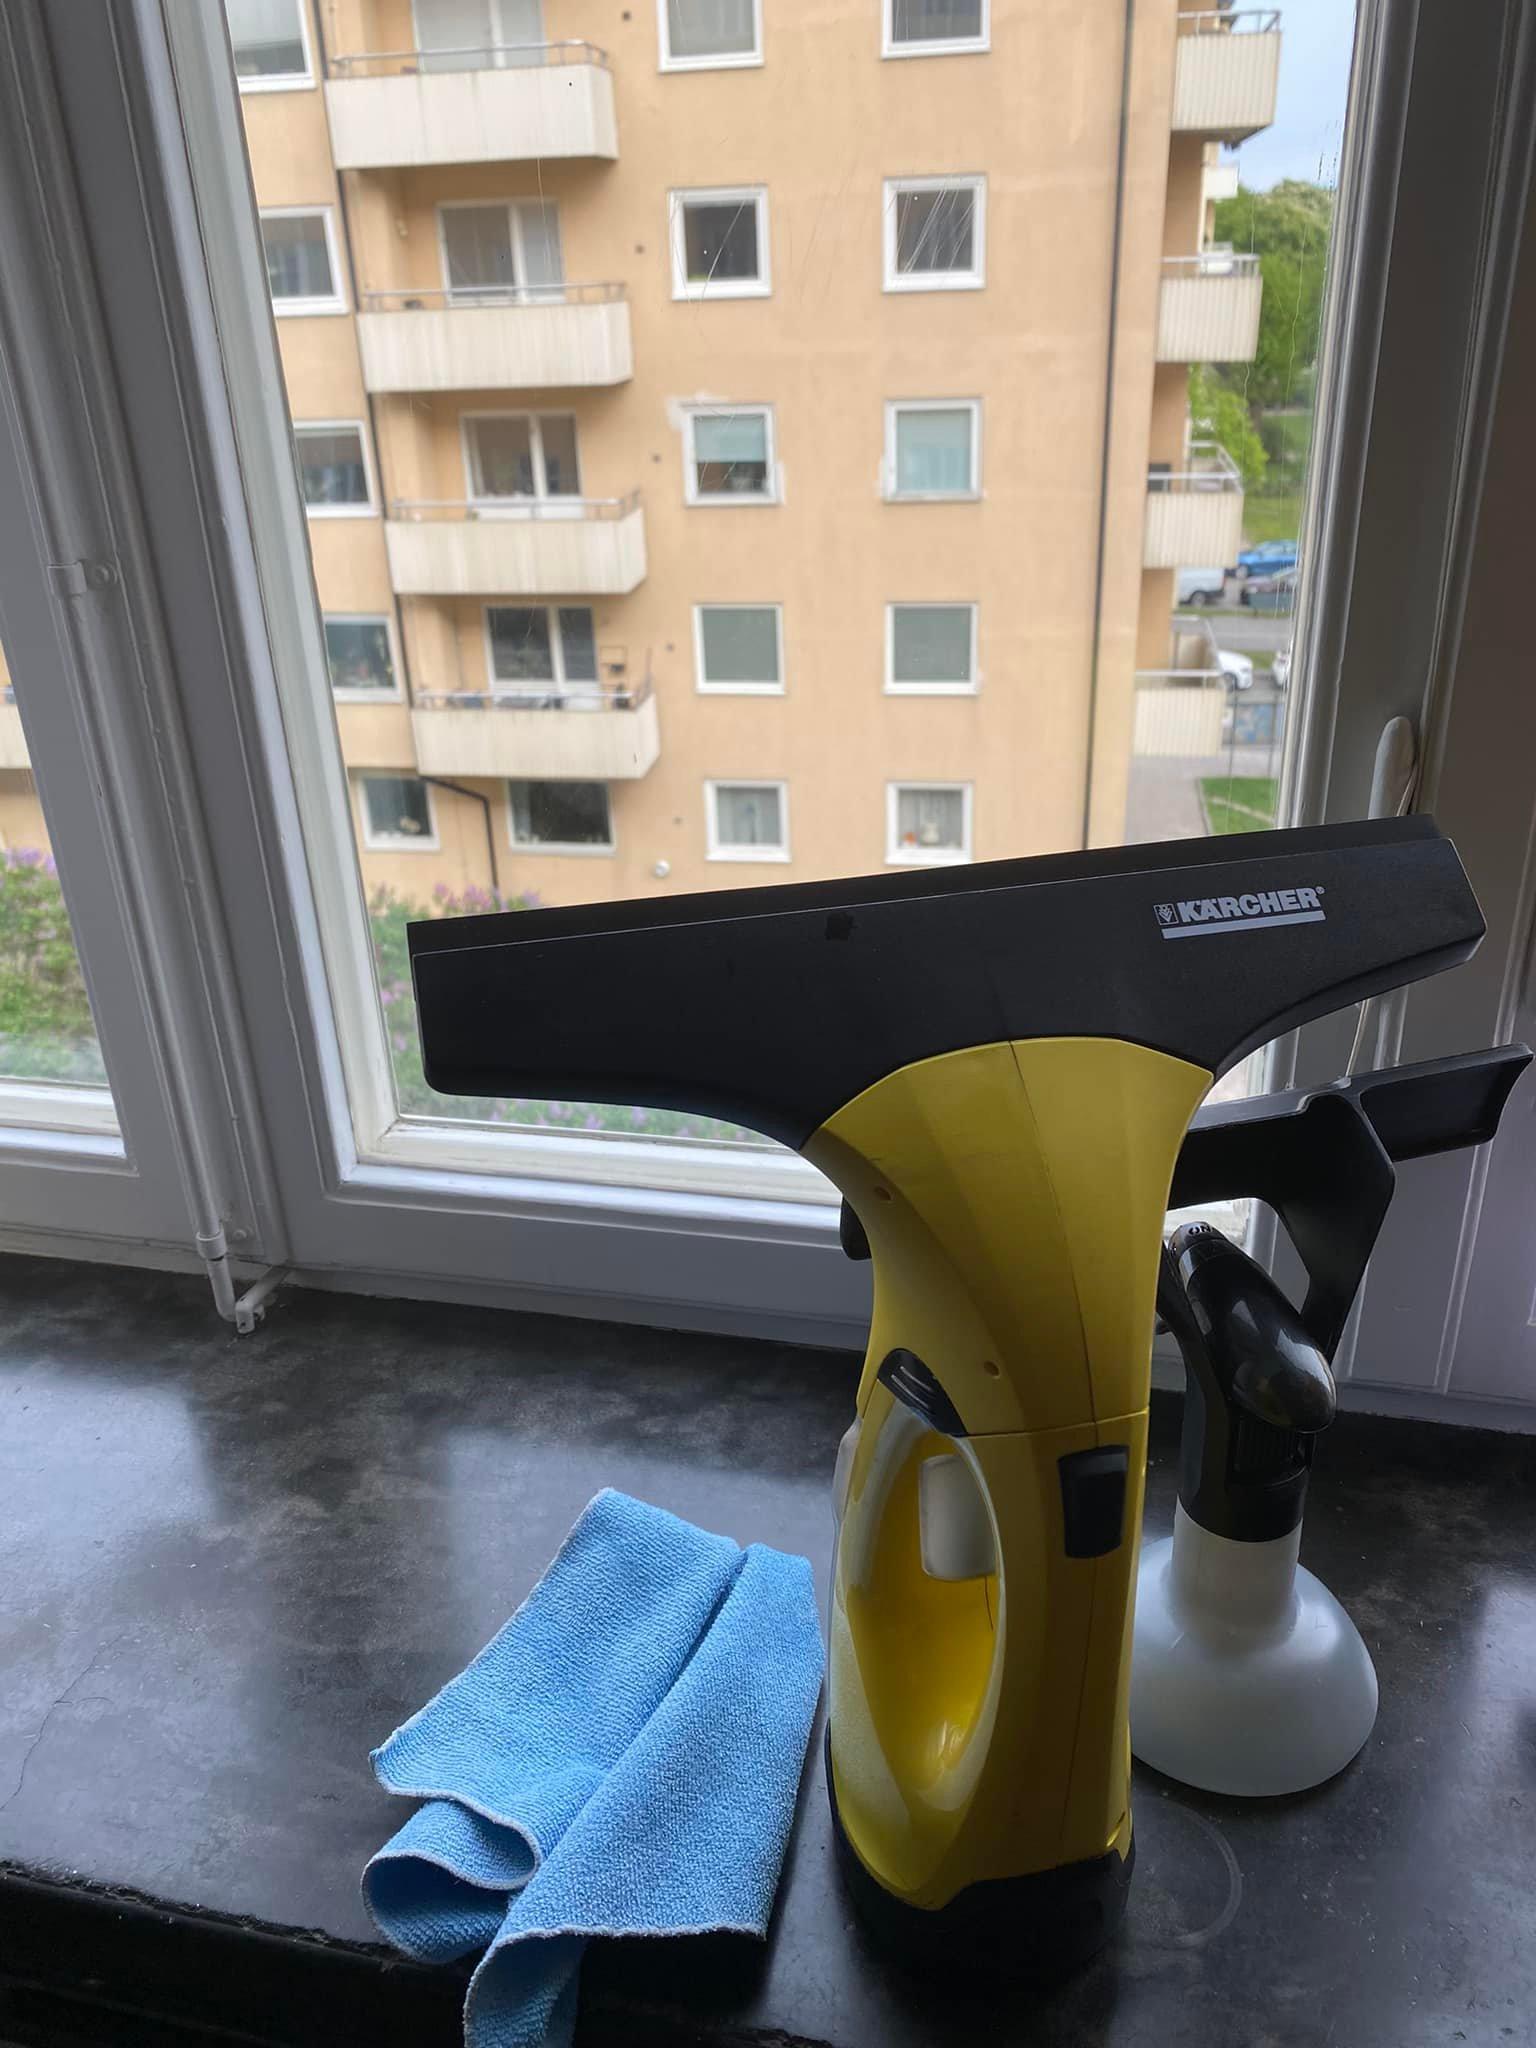 Window cleaning devices.